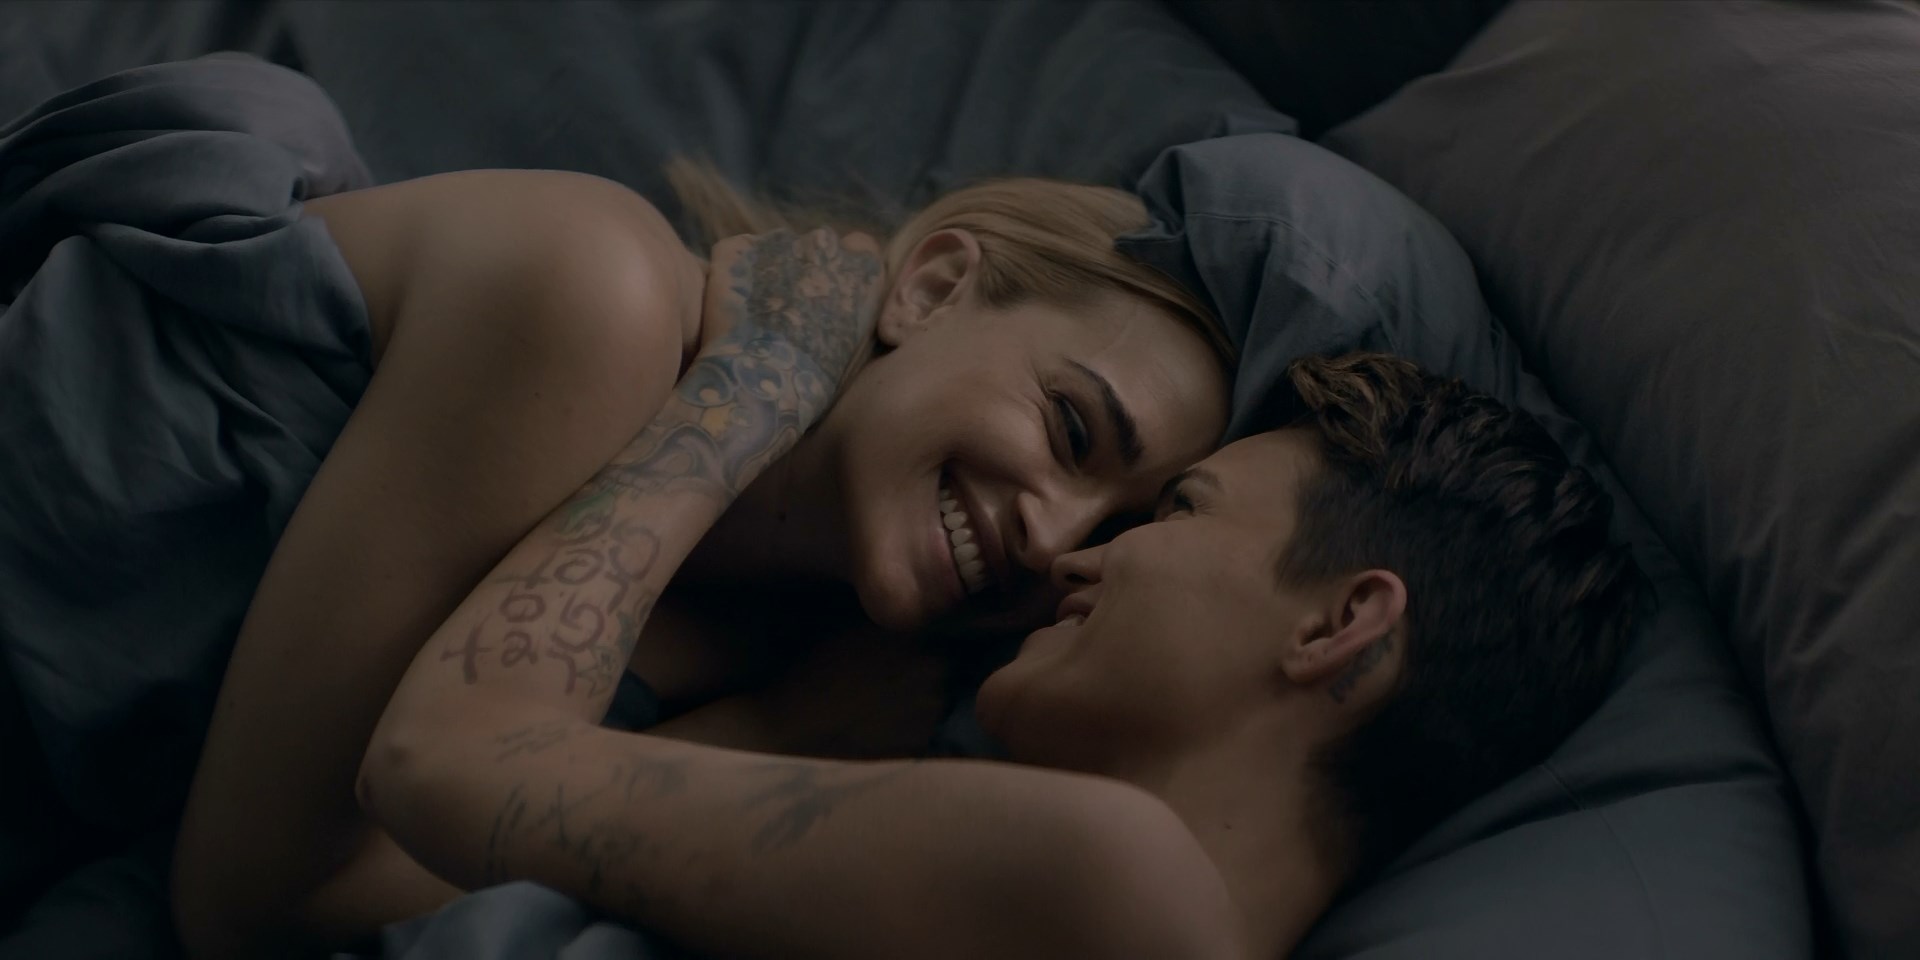 Ruby Rose sexy, Brianne Howe sexy - Batwoman s01e04 (2019)